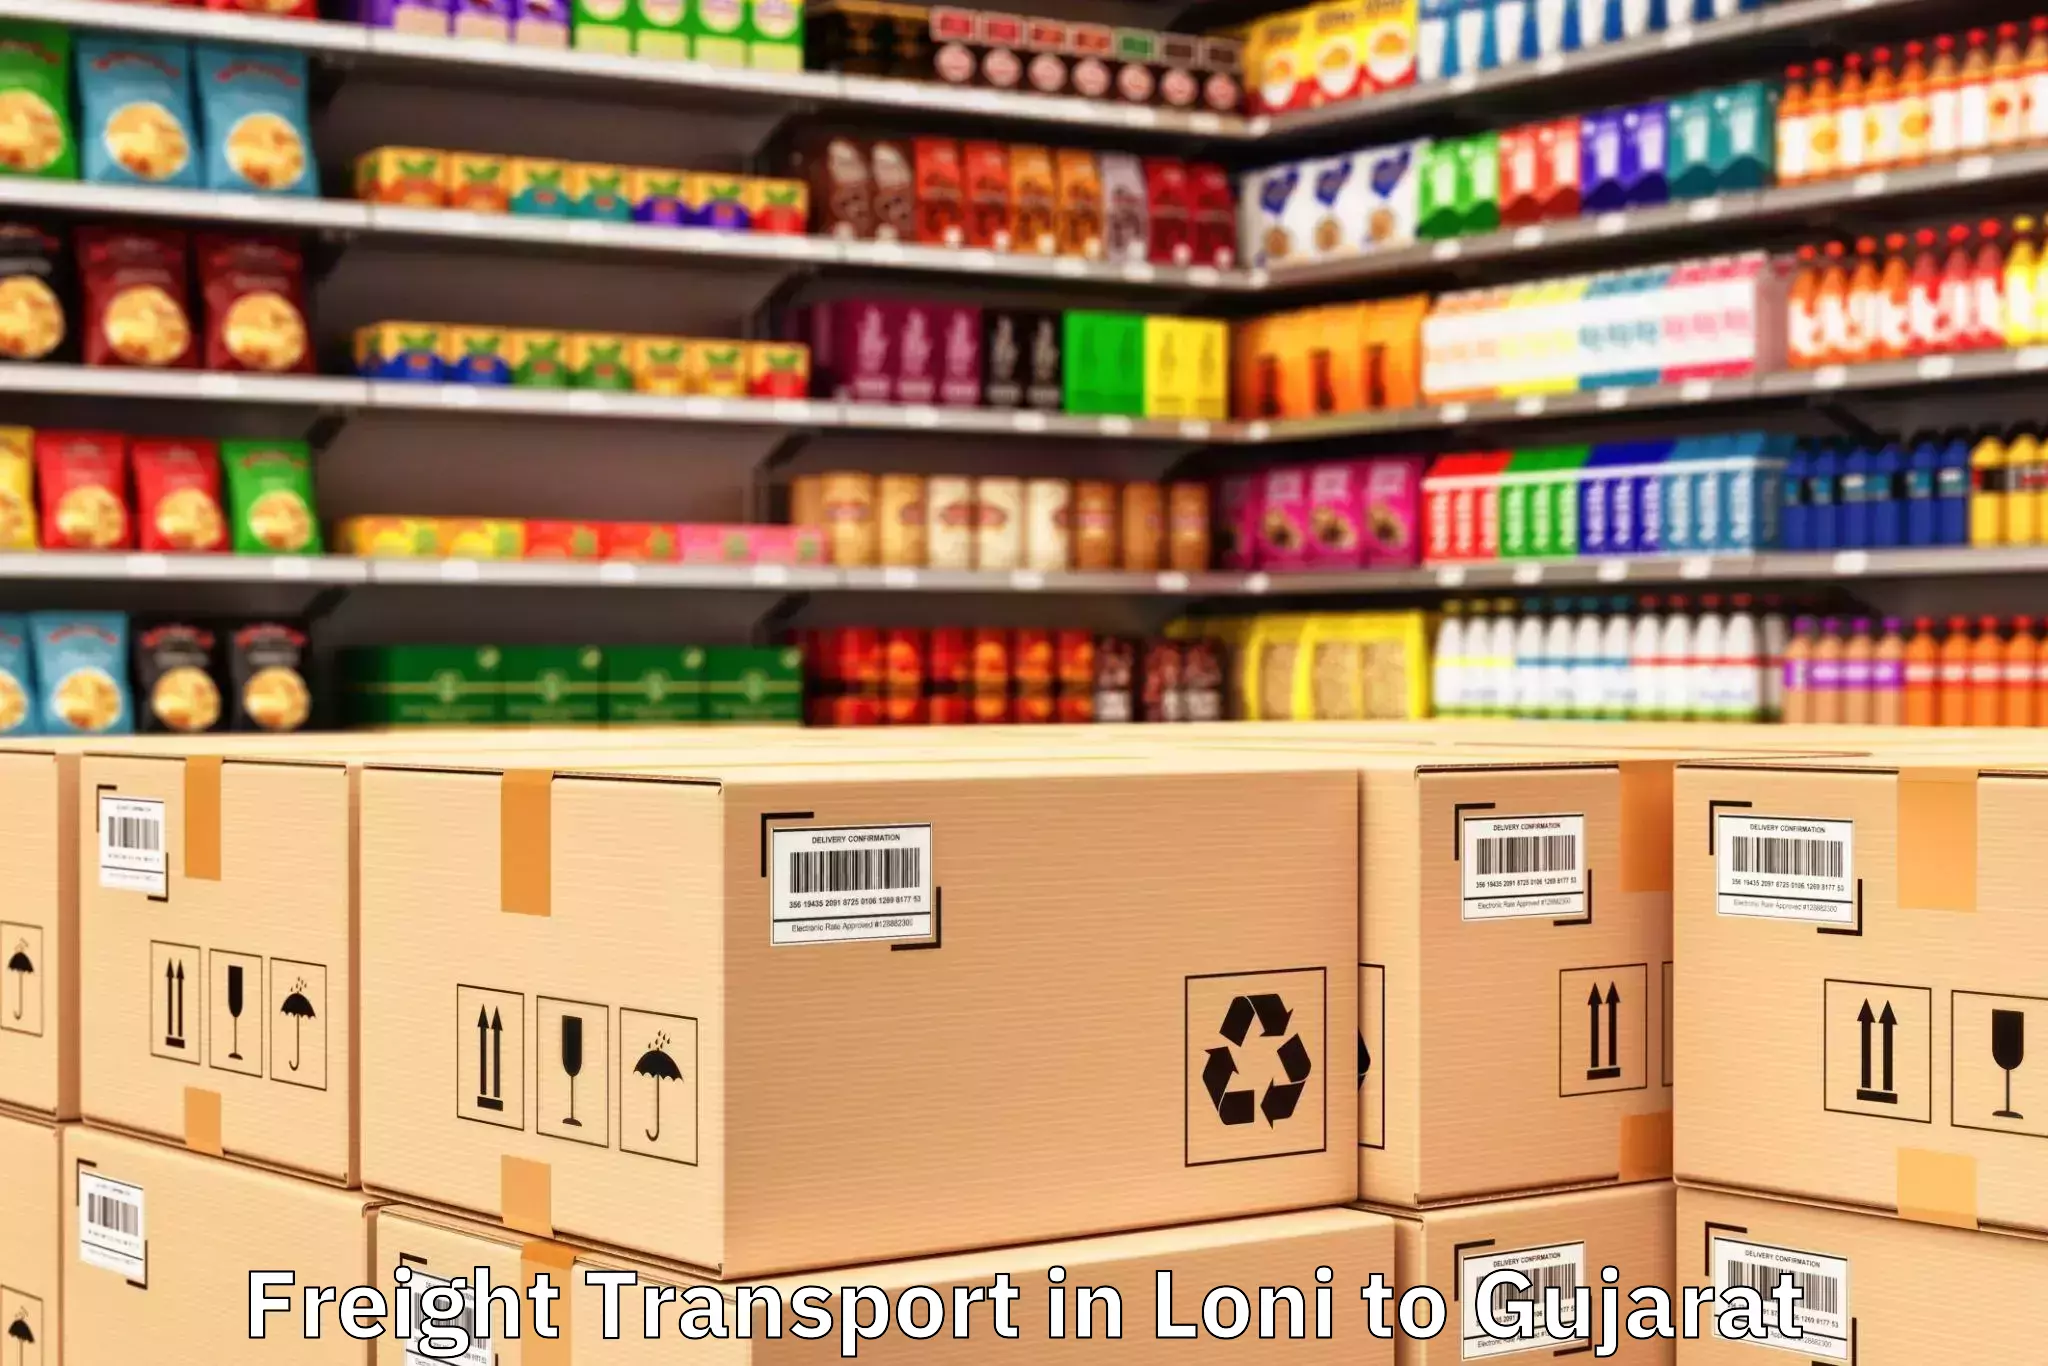 Quality Loni to Surat City Freight Transport